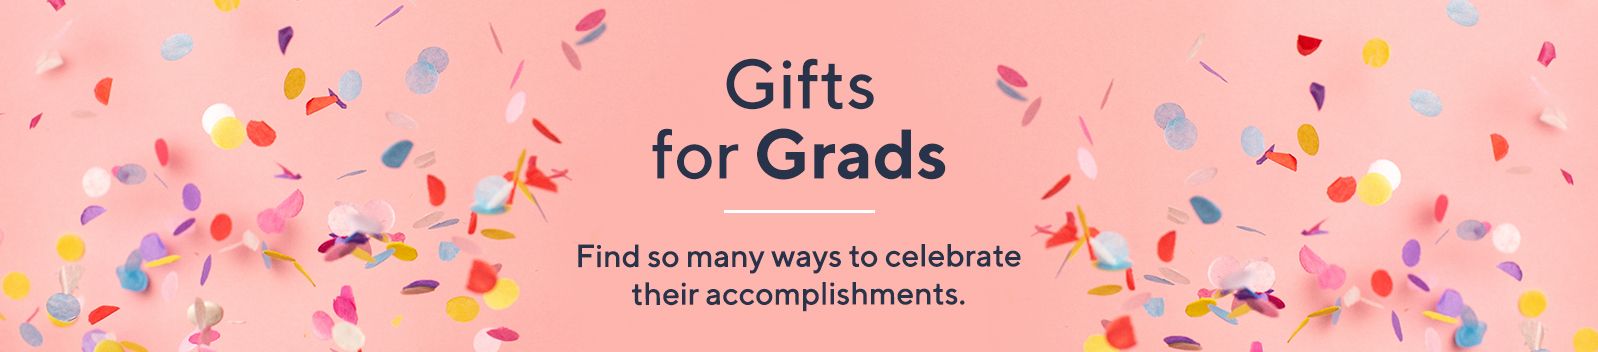 Gifts for Grads.  Find so many ways to celebrate their accomplishments.